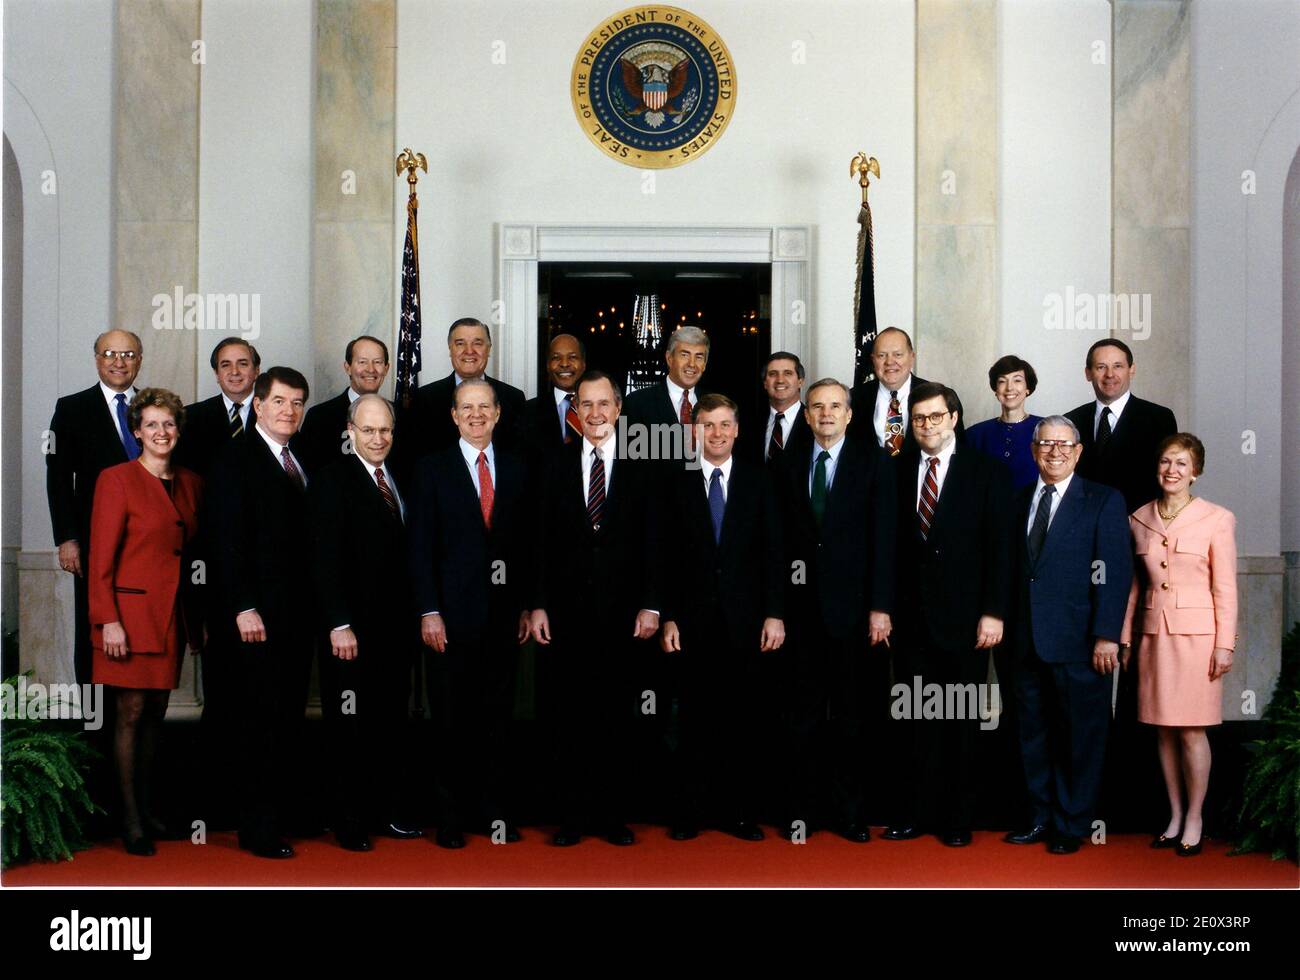 Washington, DC - March 19, 1992 -- 1992 Official George H.W. Bush Cabinet Photograph. Front Row (left to right): Lynn Martin, Secretary of Labor; Edward Madigan, Secretary of Agriculture; Richard Cheney, Secretary of Defense; James A. Baker III, Secretary of State; United States President George H.W. Bush; United States Vice President Dan Quayle; Nicholas Brady, Secretary of the Treasury; William Barr, Attorney General, Manuel Lujan, Jr., Secretary of the Interior; Barbara Franklin, Secretary of Commerce. Second Row (left to right): Clayton Yeutter, Counsellor to the President for Domestic Pol Stock Photo